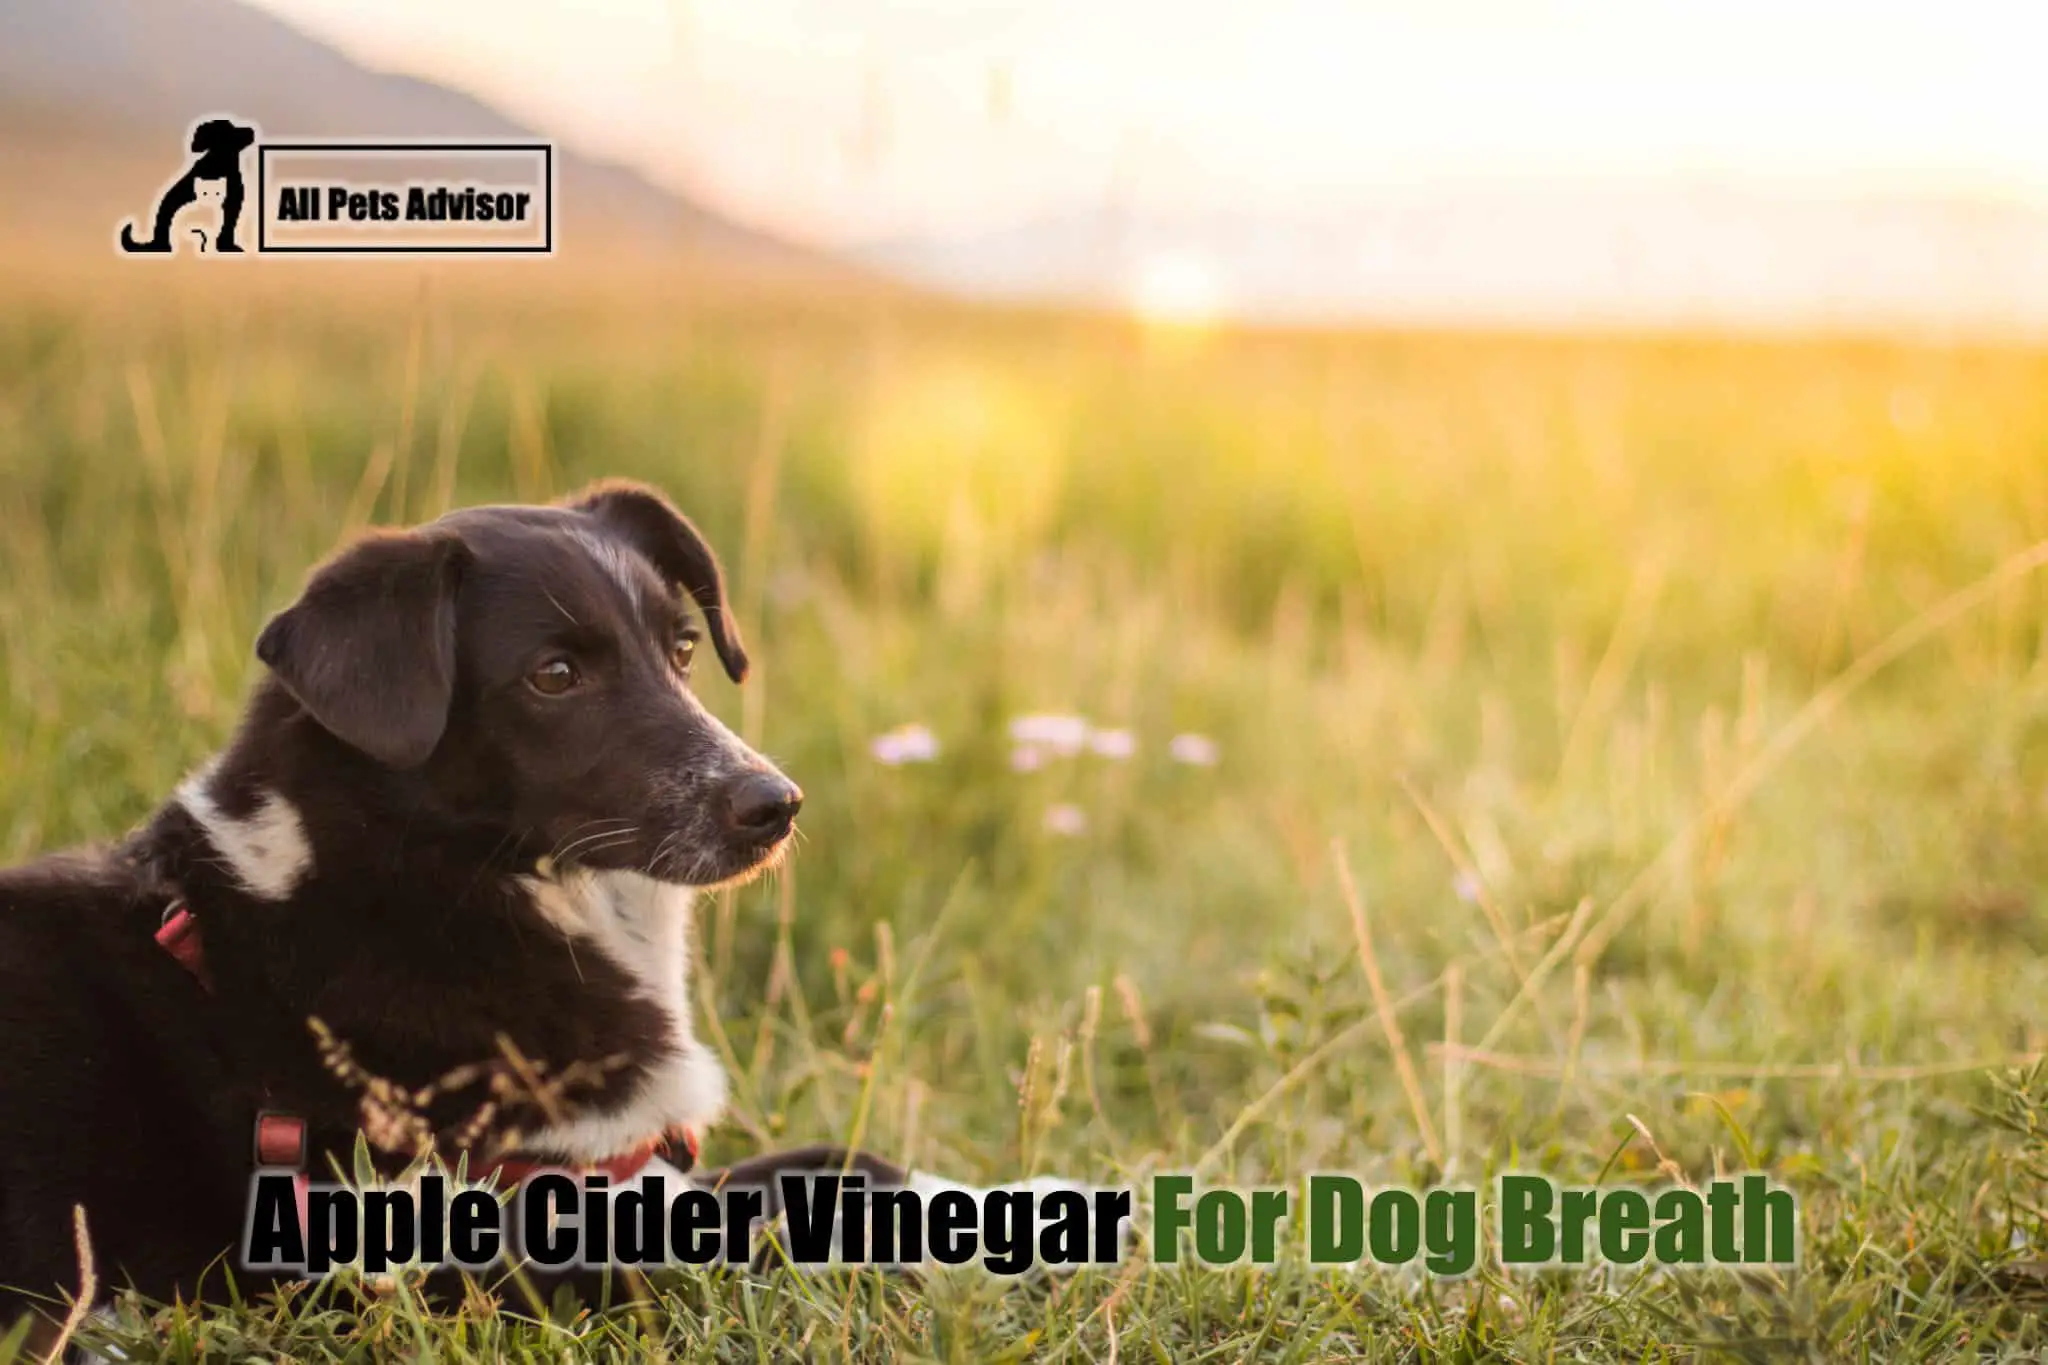 You are currently viewing Apple Cider Vinegar For Dog Breath